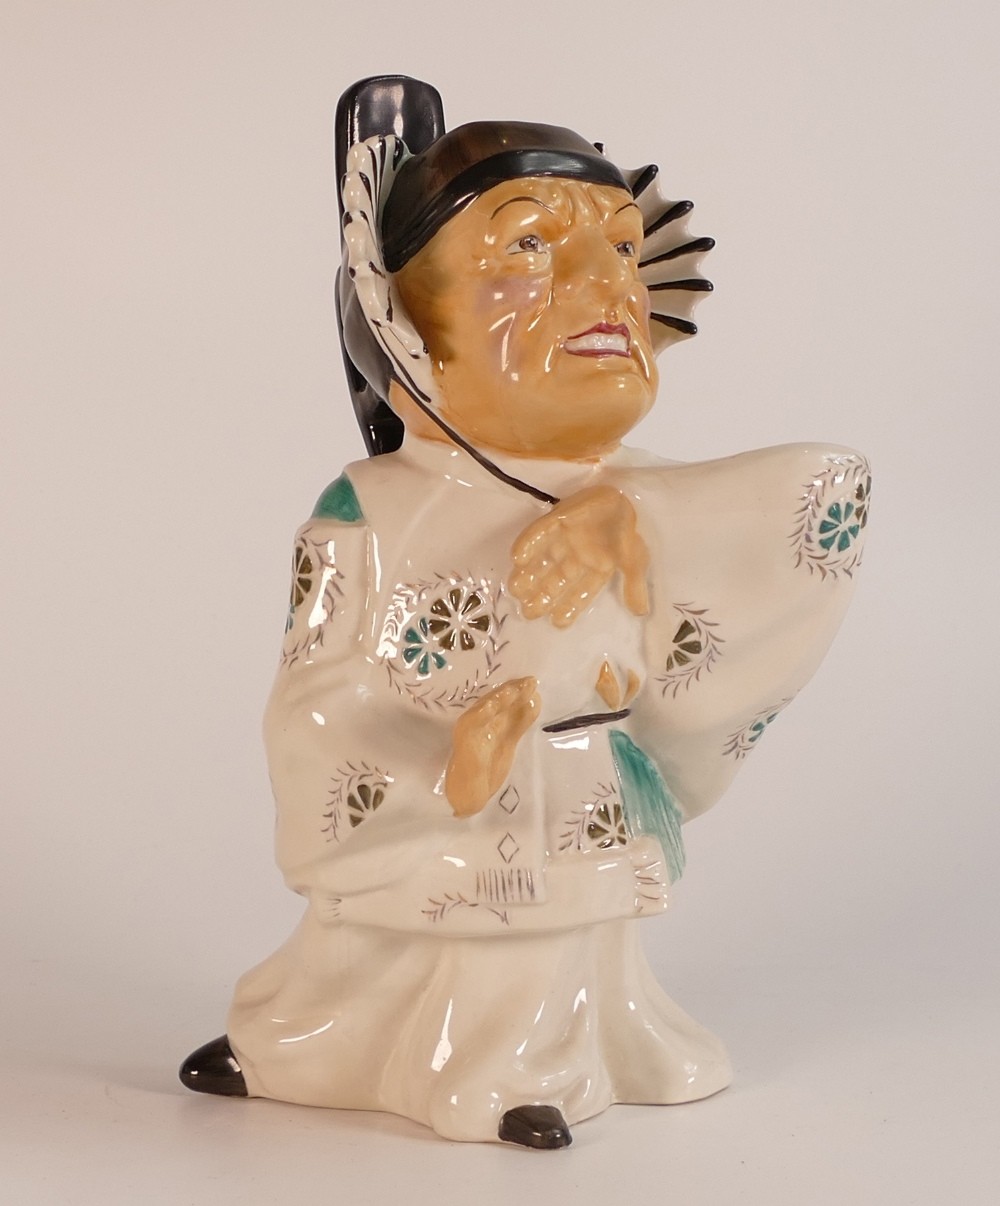 Shorter & Sons 'Mikado' Toby jug, early 20th century. Designed in 1940's after the D'Oyly Carte